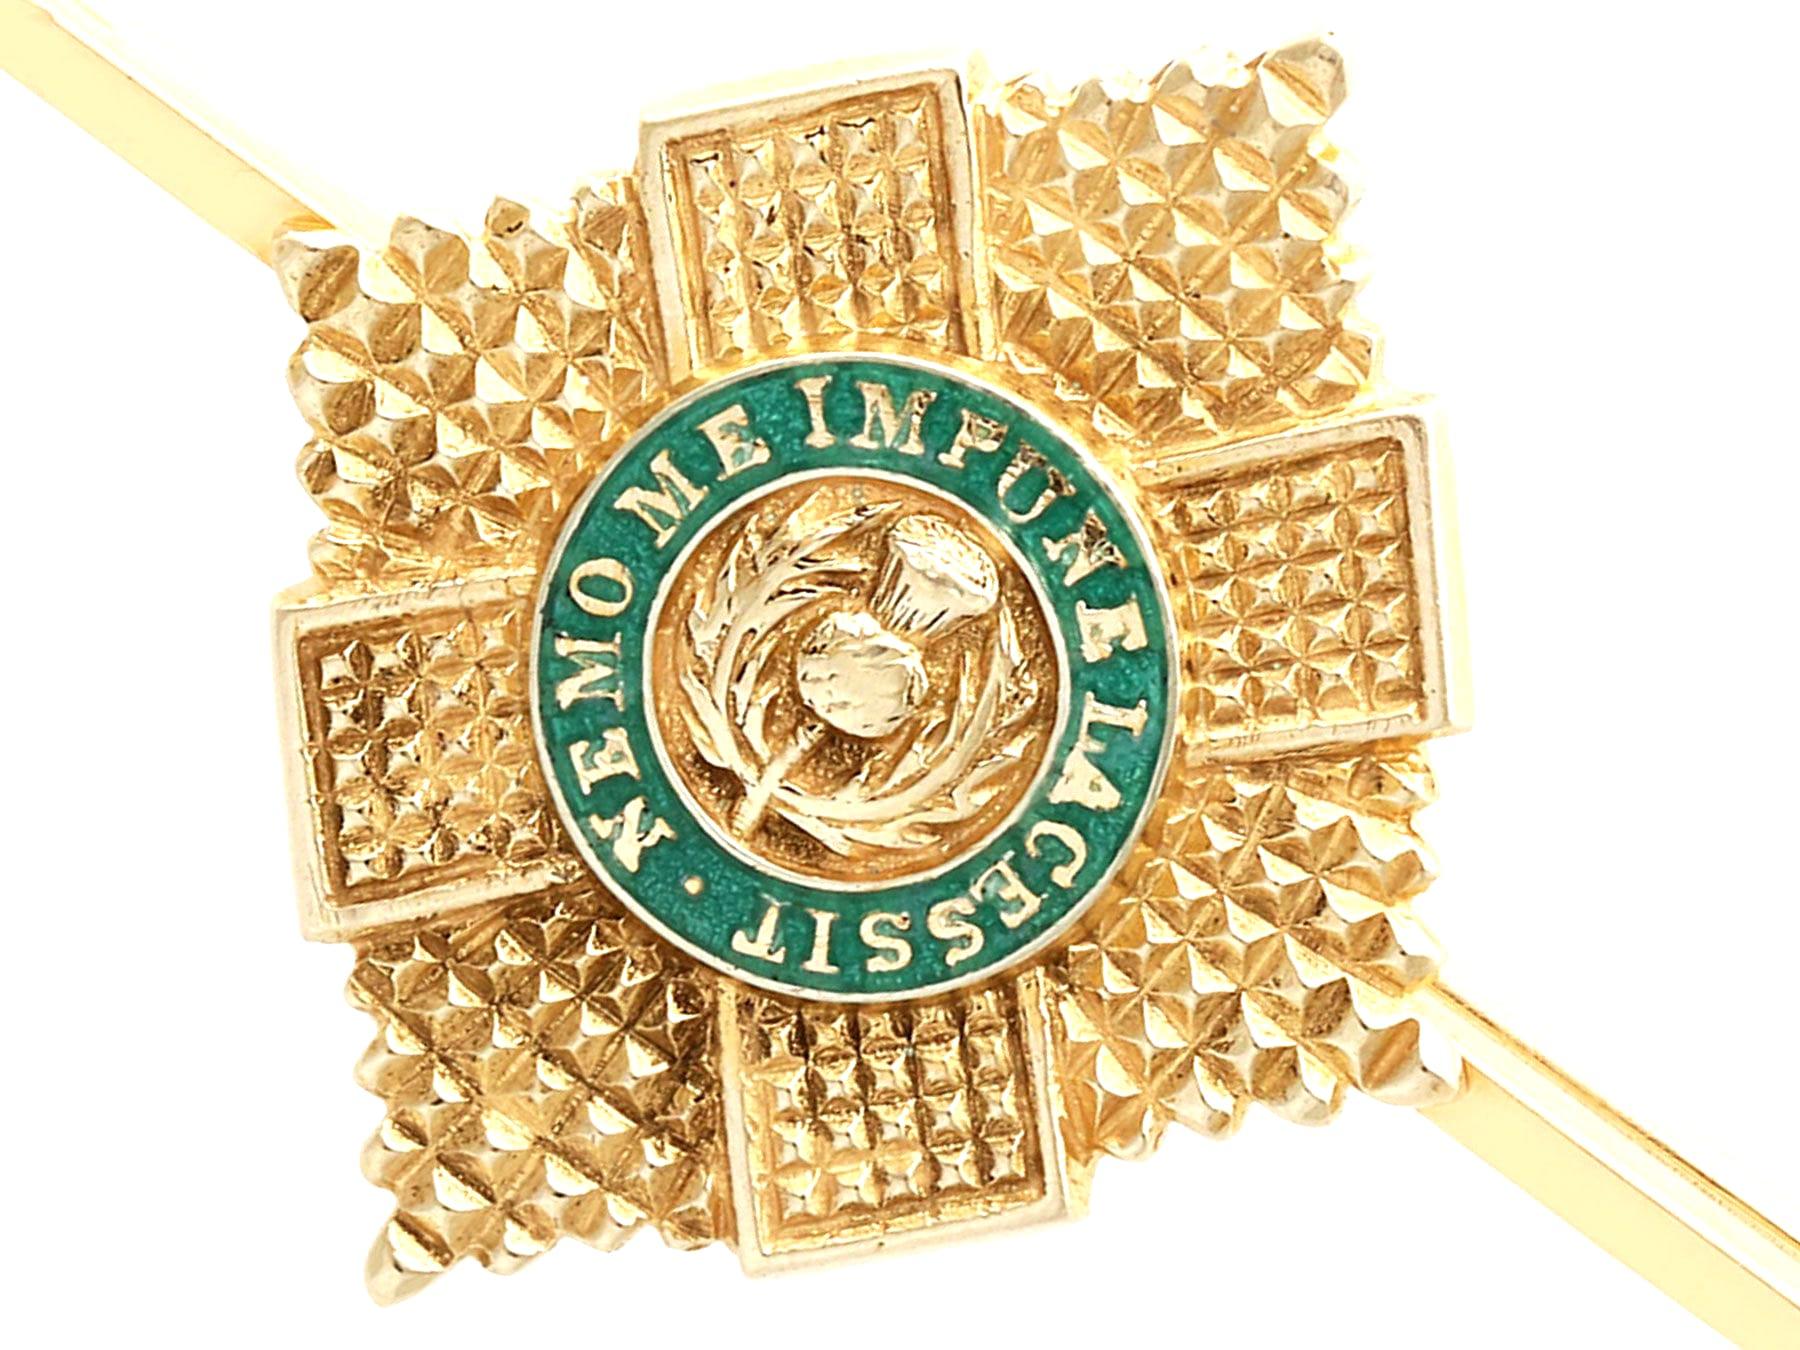 A fine and impressive vintage Scots Guard Brooch in 9 karat yellow gold and enamel; part of our diverse collection of military related items.

This impressive vintage Scots Guards regimental brooch has been crafted in 9k yellow gold.

The bar brooch